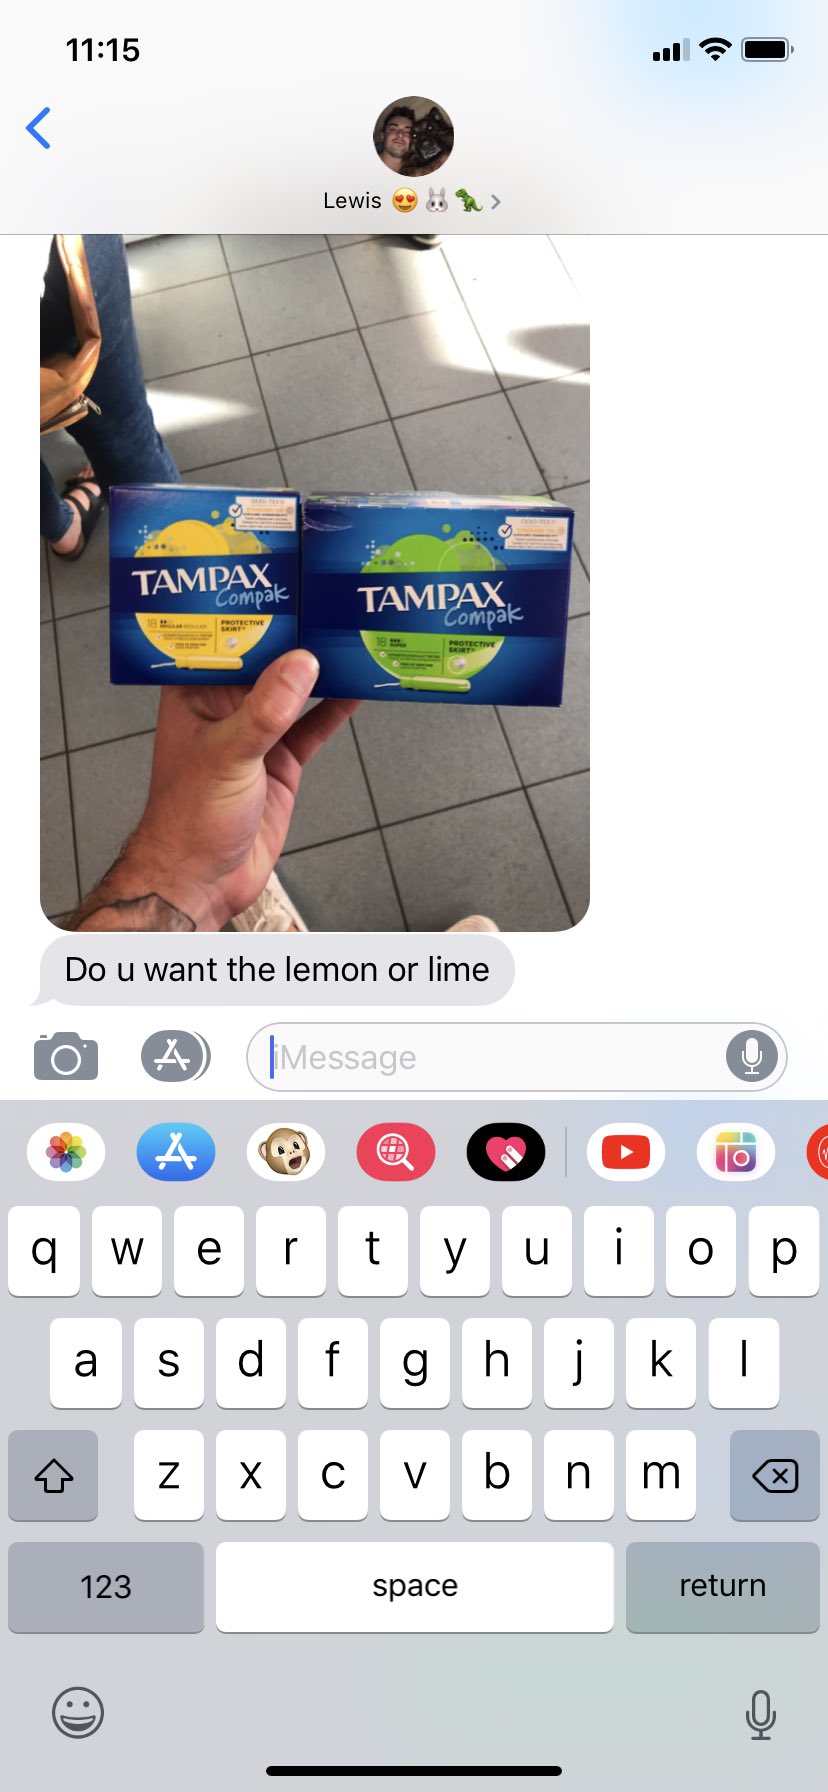 Boyfriend buying tampons for girlfriend asks whether she wants 'lemon or  lime' flavor | Mashable